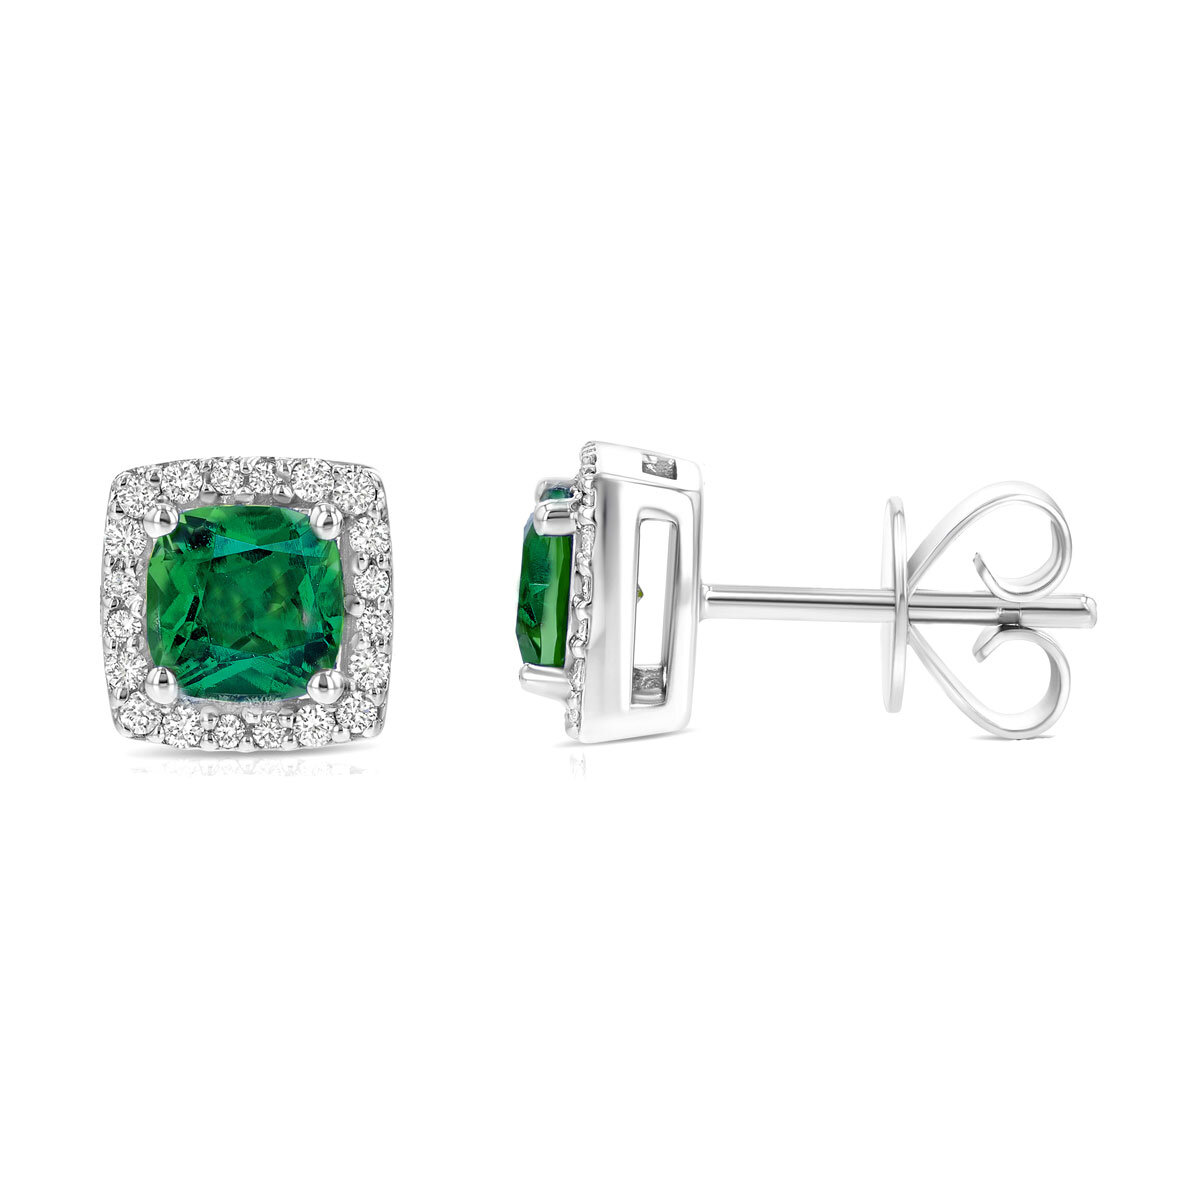 Cushion Cut Lab Emerald and 0.13ctw Diamond Stud Earrings, 14ct White Gold